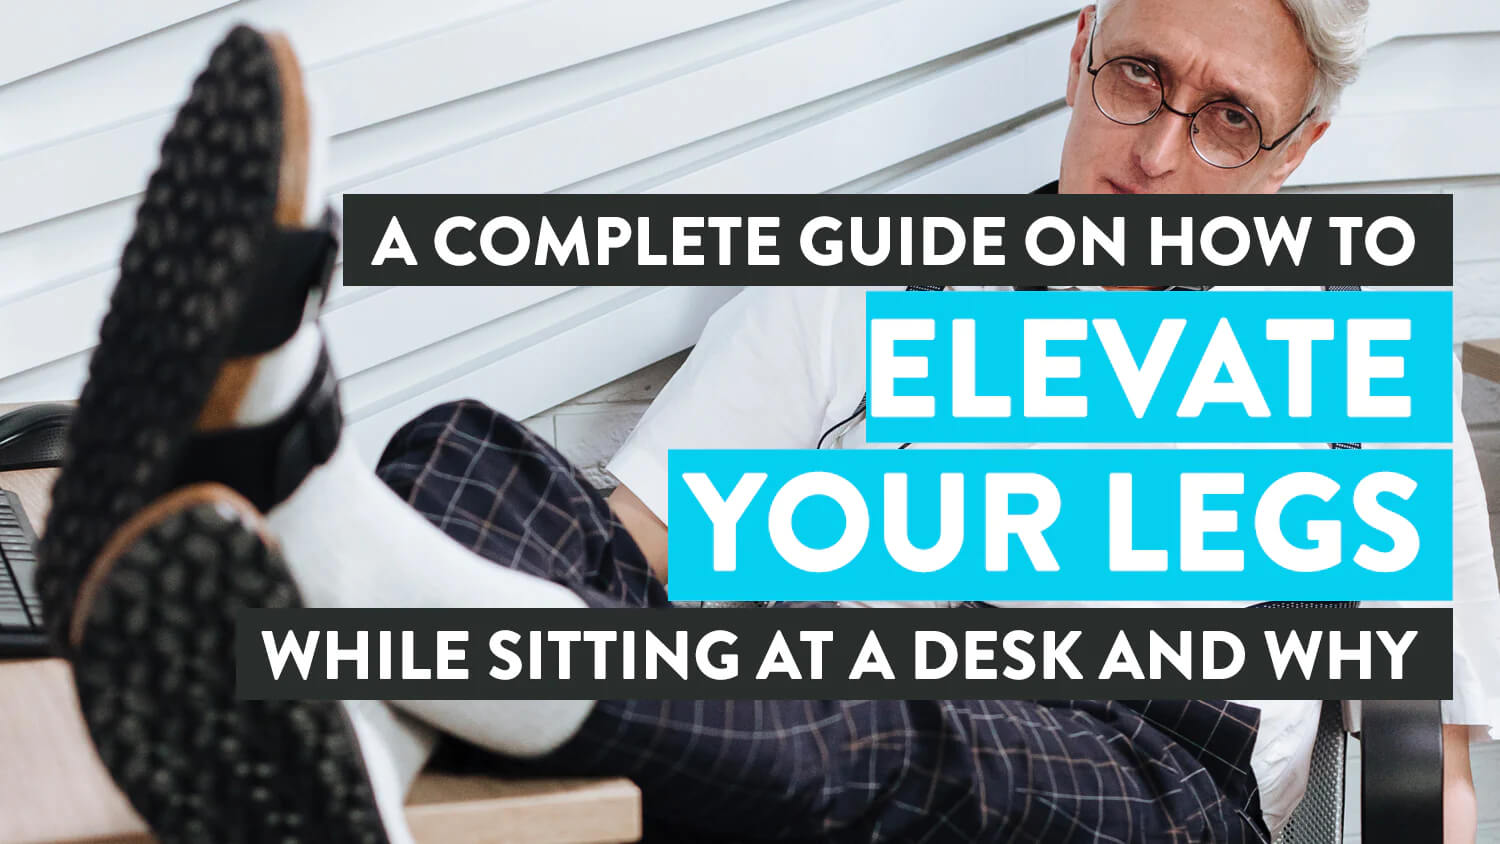 How to Elevate Your Legs While Sitting at a Desk: A Guide - Desky USA